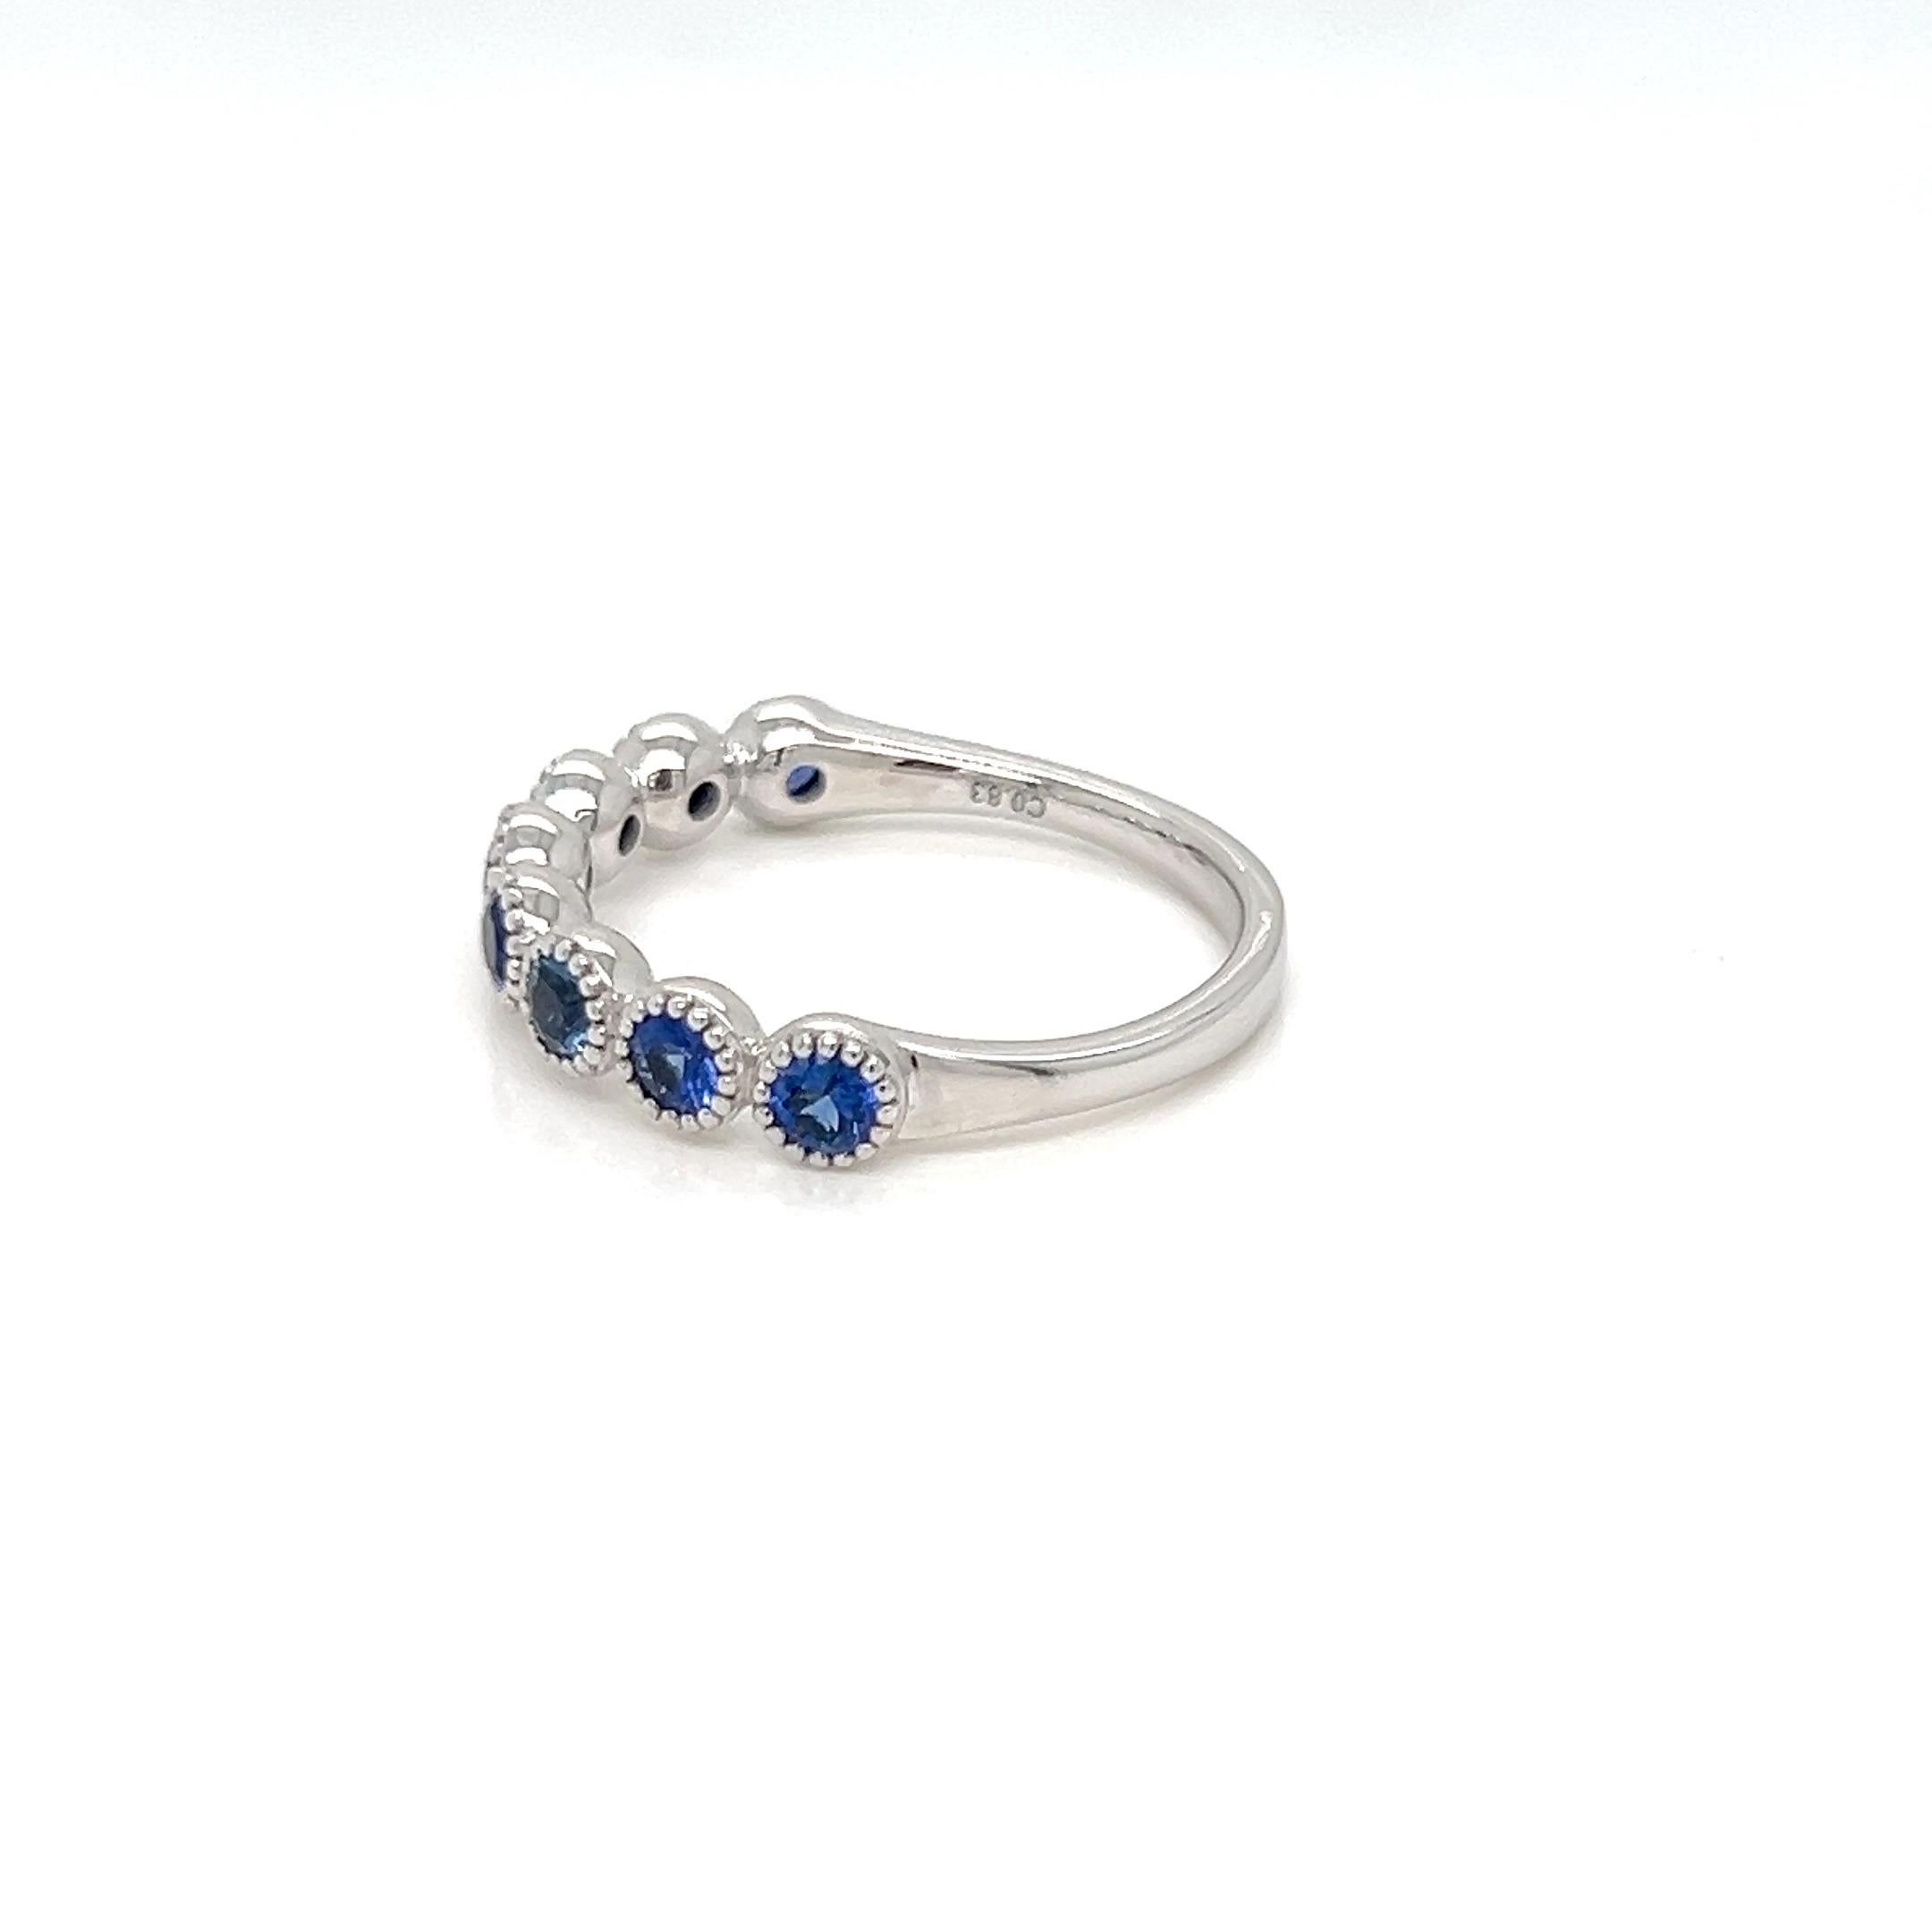 Presenting our magnificent 0.83 Carat Half Eternity Ring in Ceylon Sapphire, a classic design sure to enthrall and fascinate. A stunning array of 0.83 carats of meticulously chosen Ceylon Sapphires, expertly set in a Pave Bead setting, adorn this